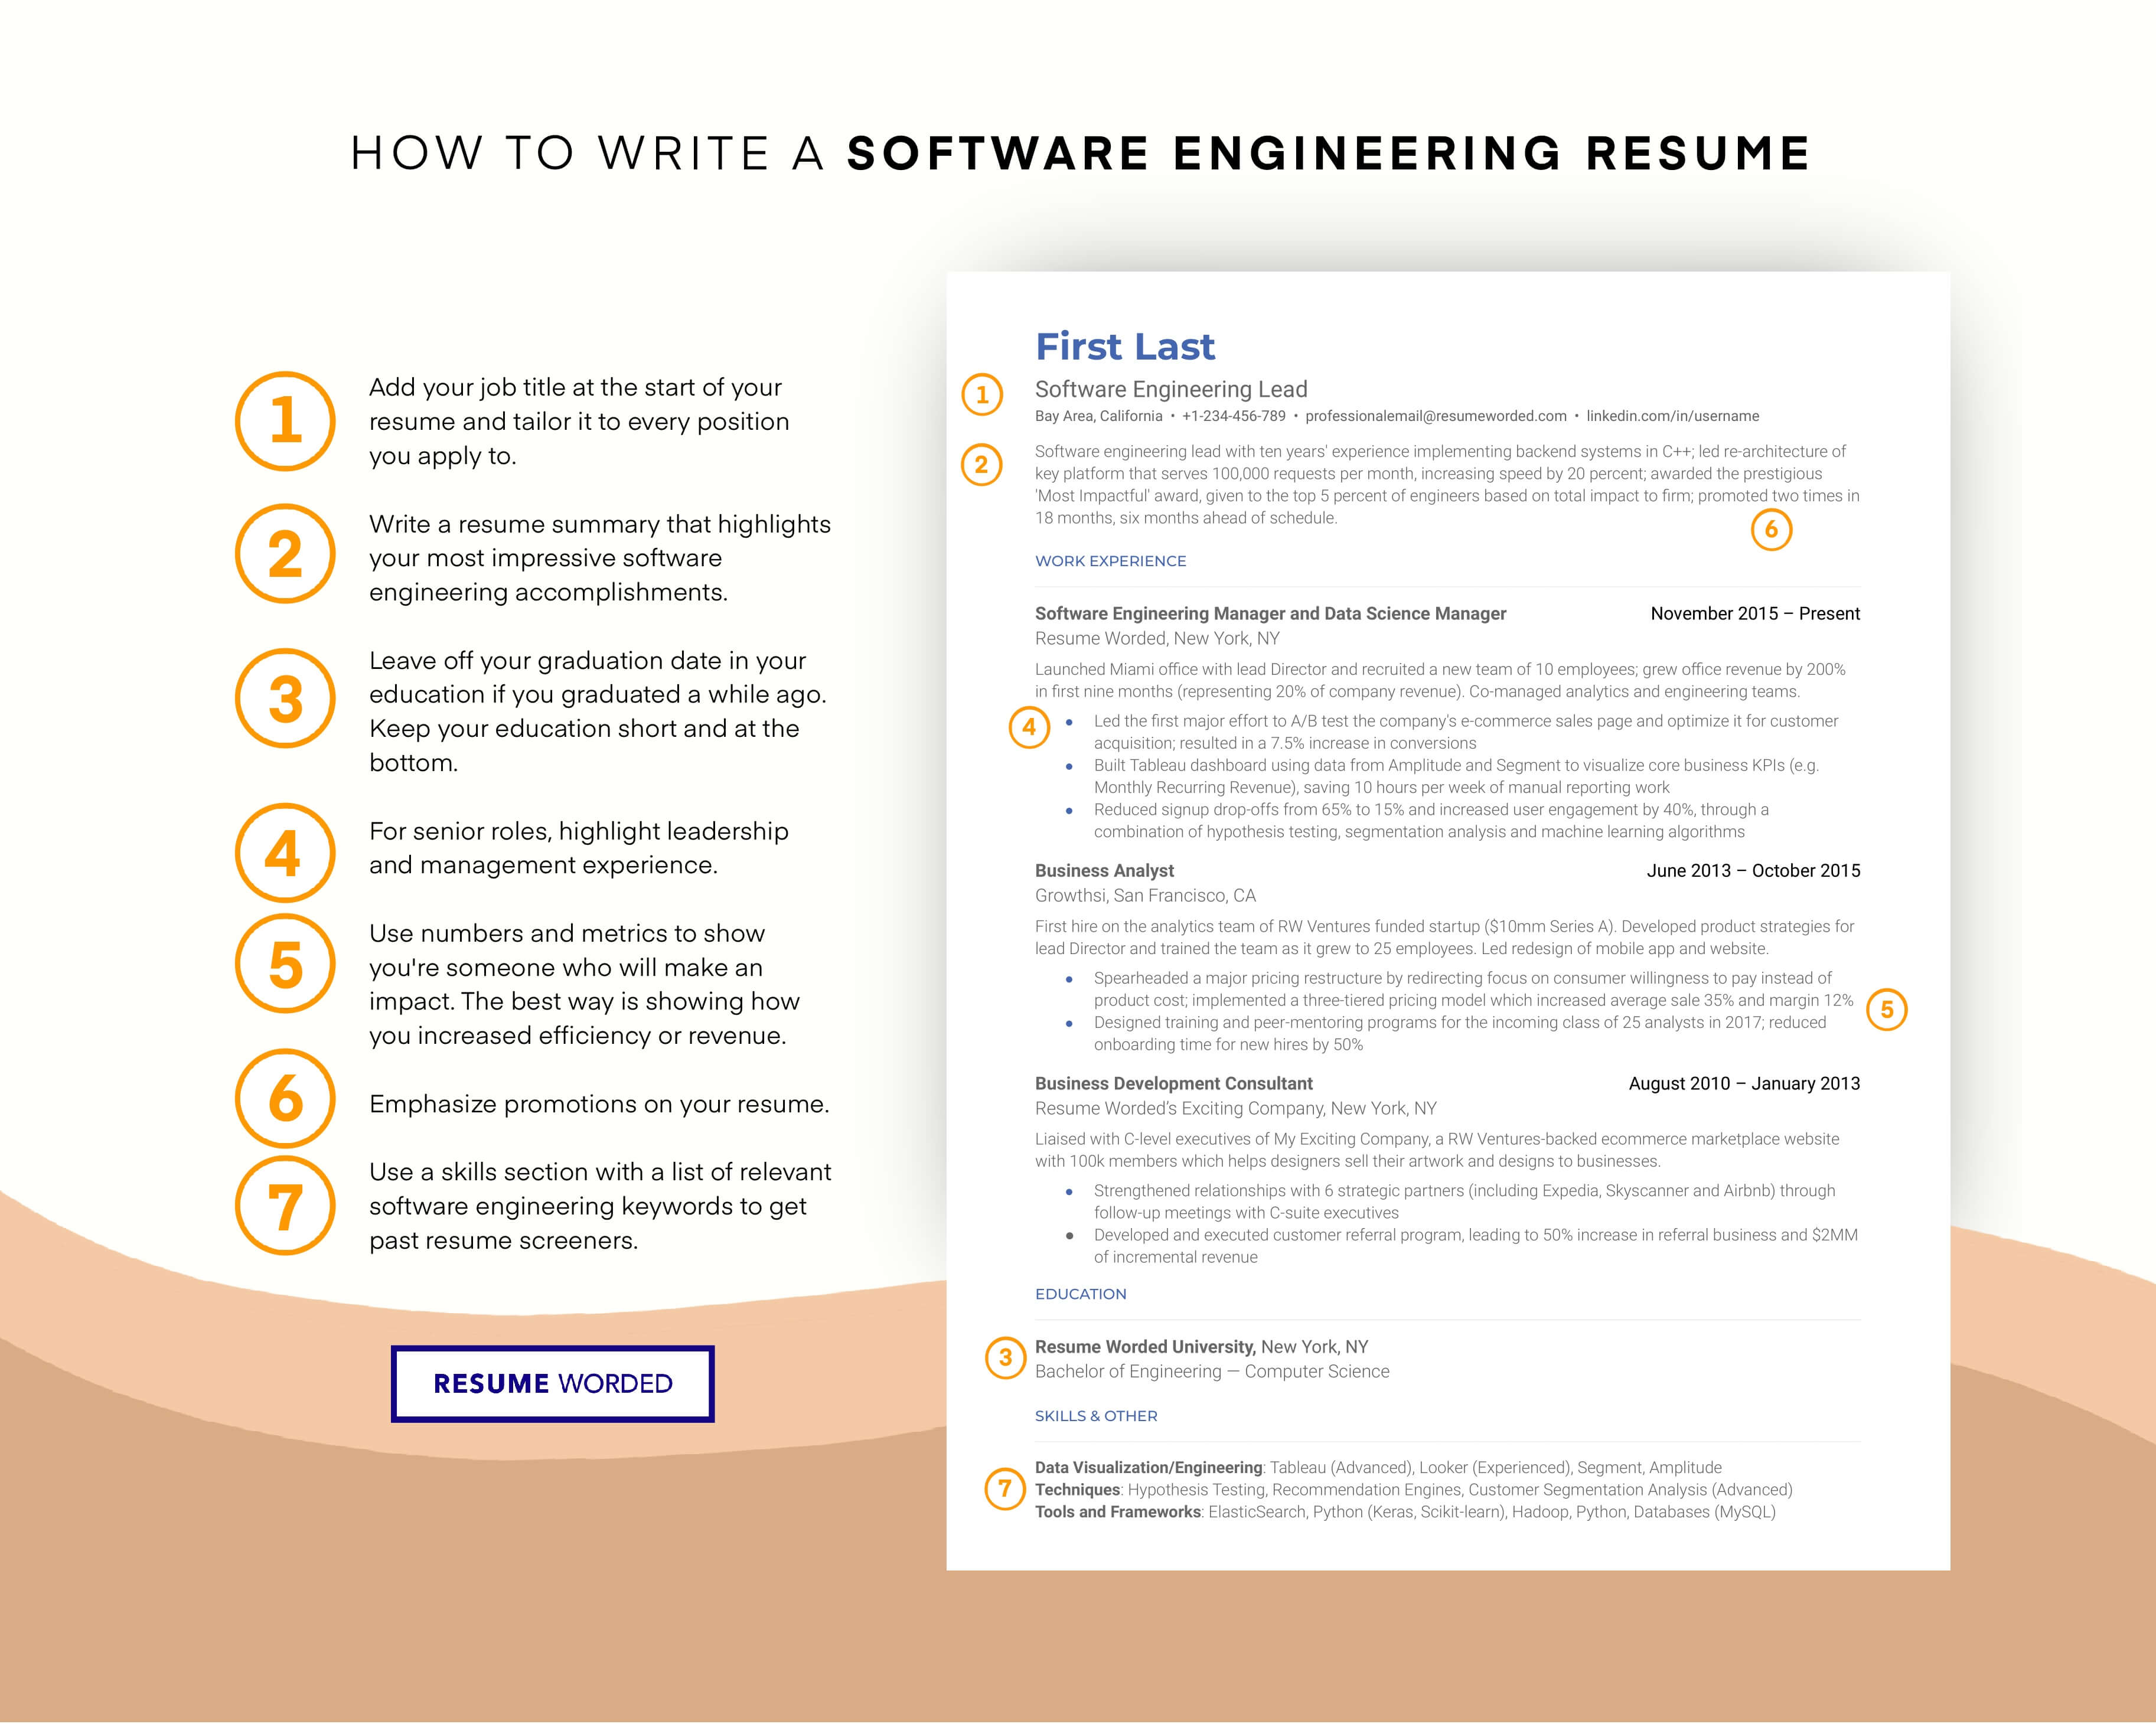 Emphasize transferable experience and hard skills across the full software engineering stack - Junior Full Stack Developer Resume